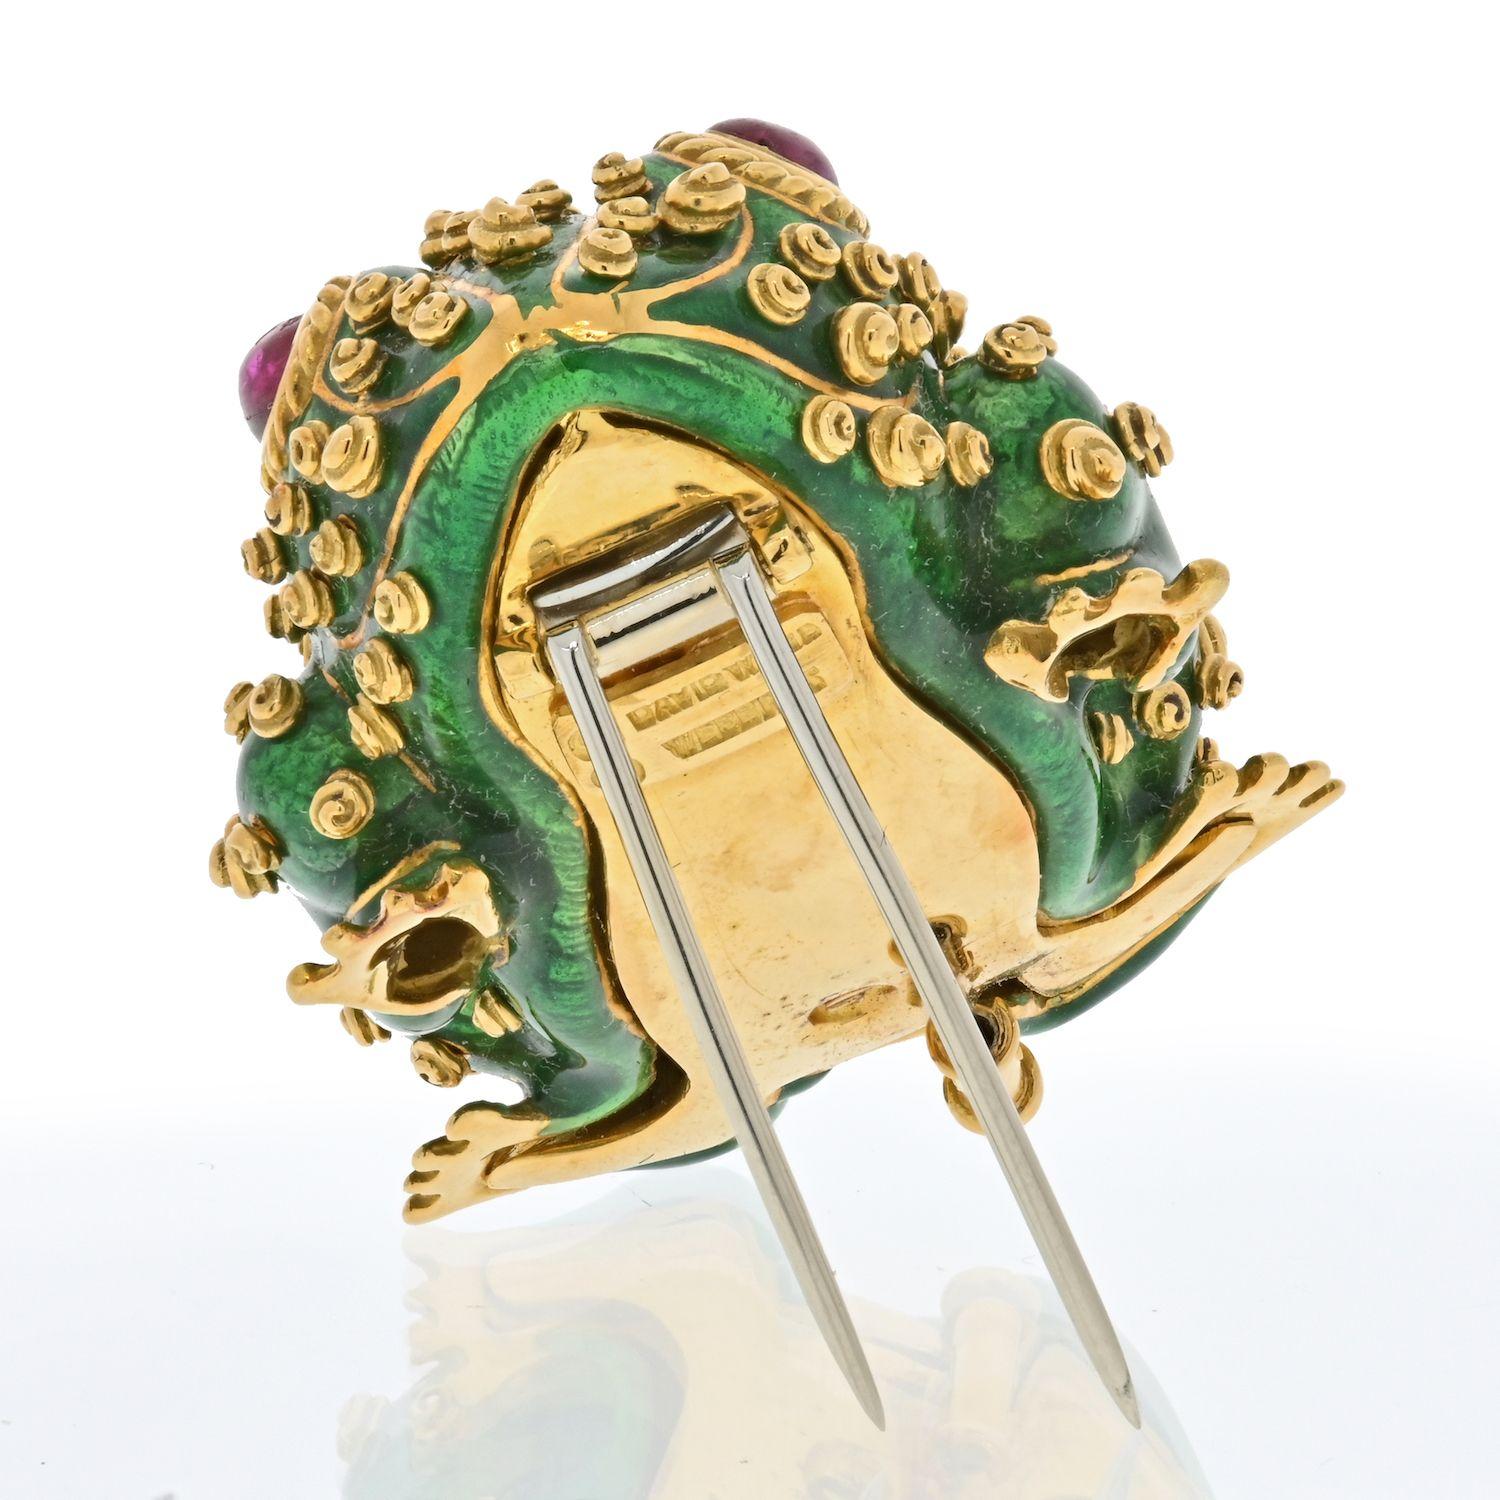 Own this brooch and will bring you luck! Did you know that frog was just one of David Webb's many quips. This dear frog was among the many frogs hatched by the jeweler in 1964. Webb creations are highly sought after and wildly collectible.
This